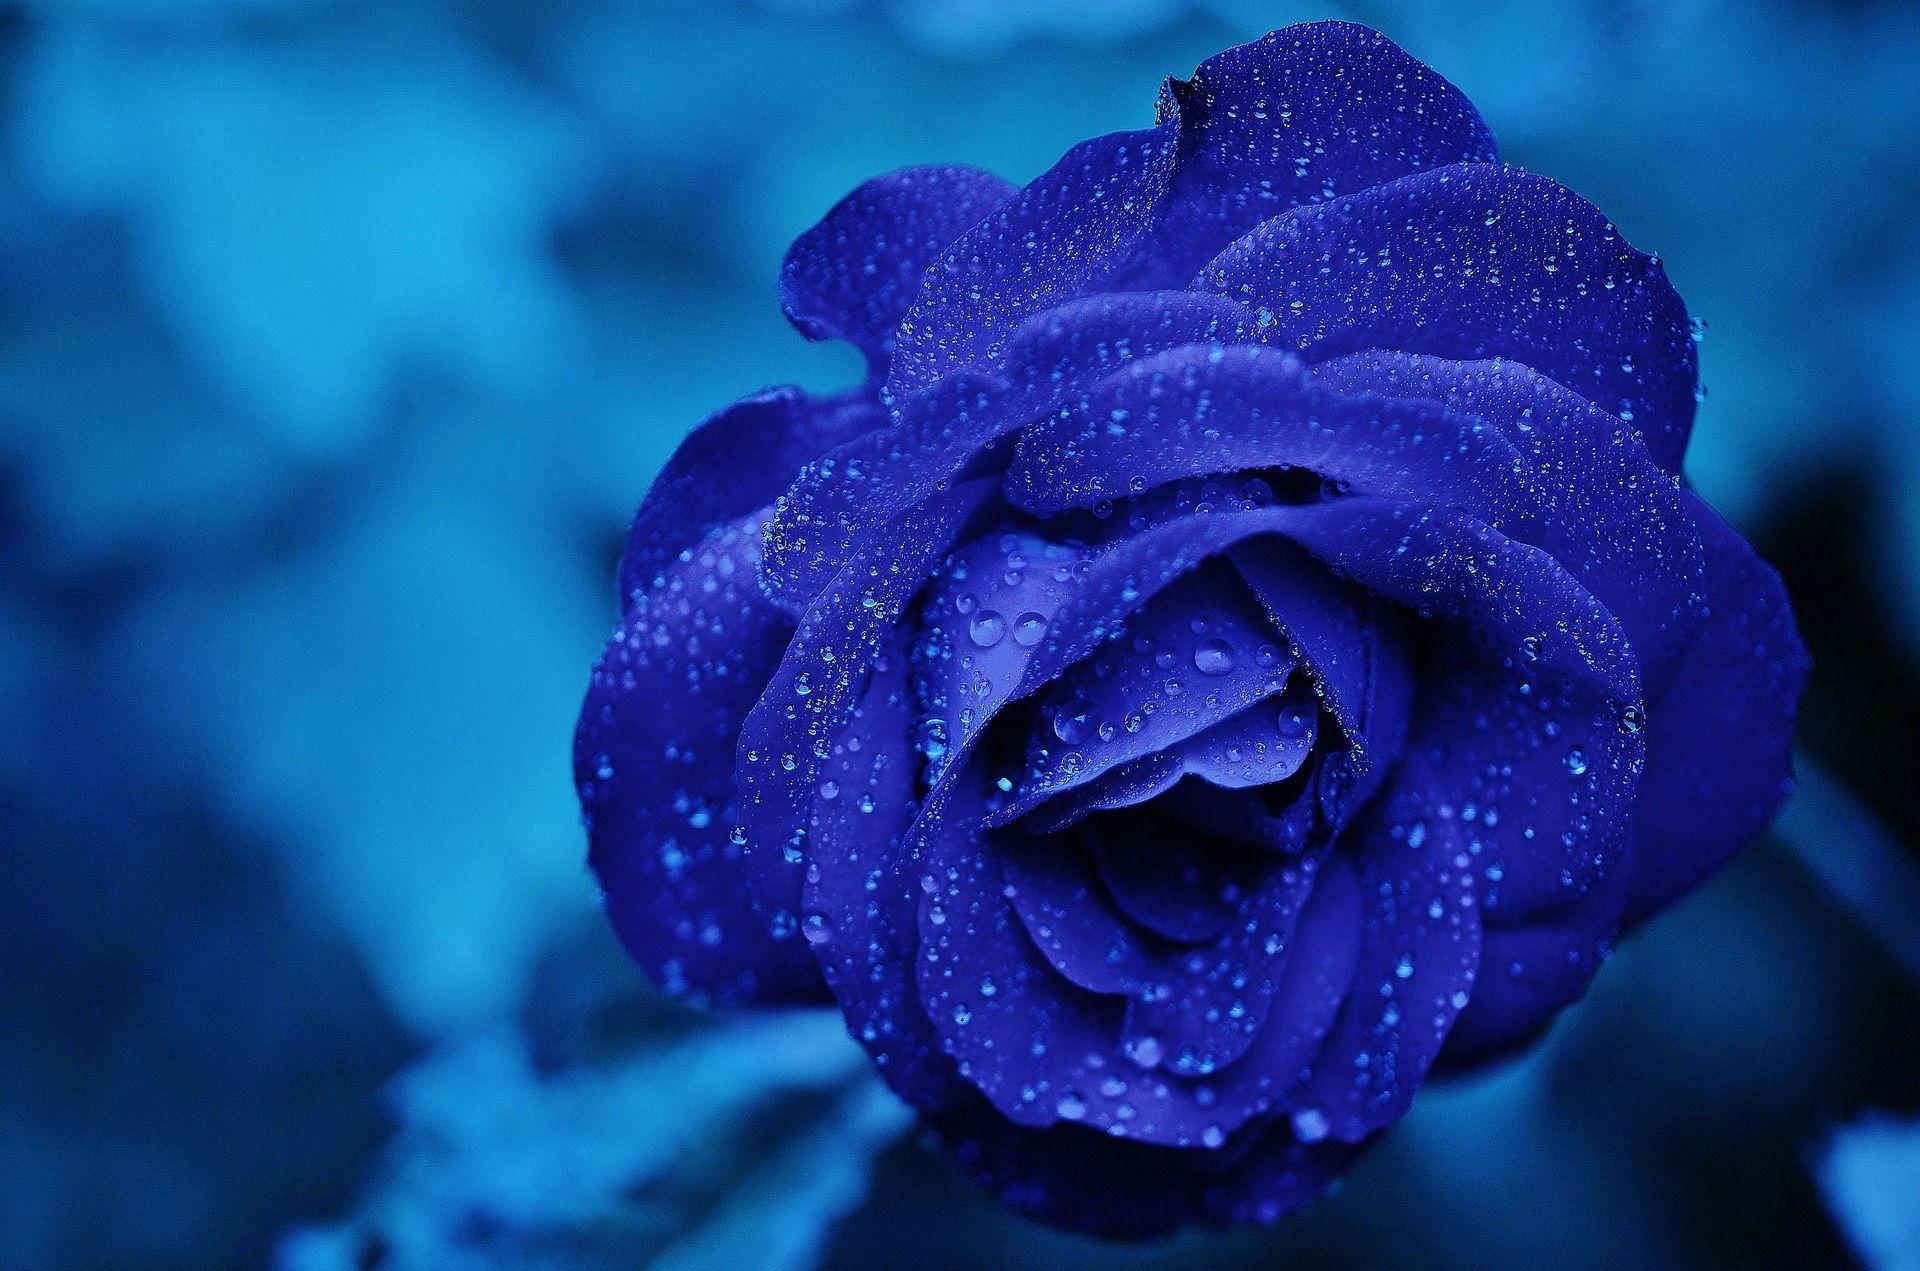 Download Free Full HD 1080p Blue Rose Wallpaper Picture